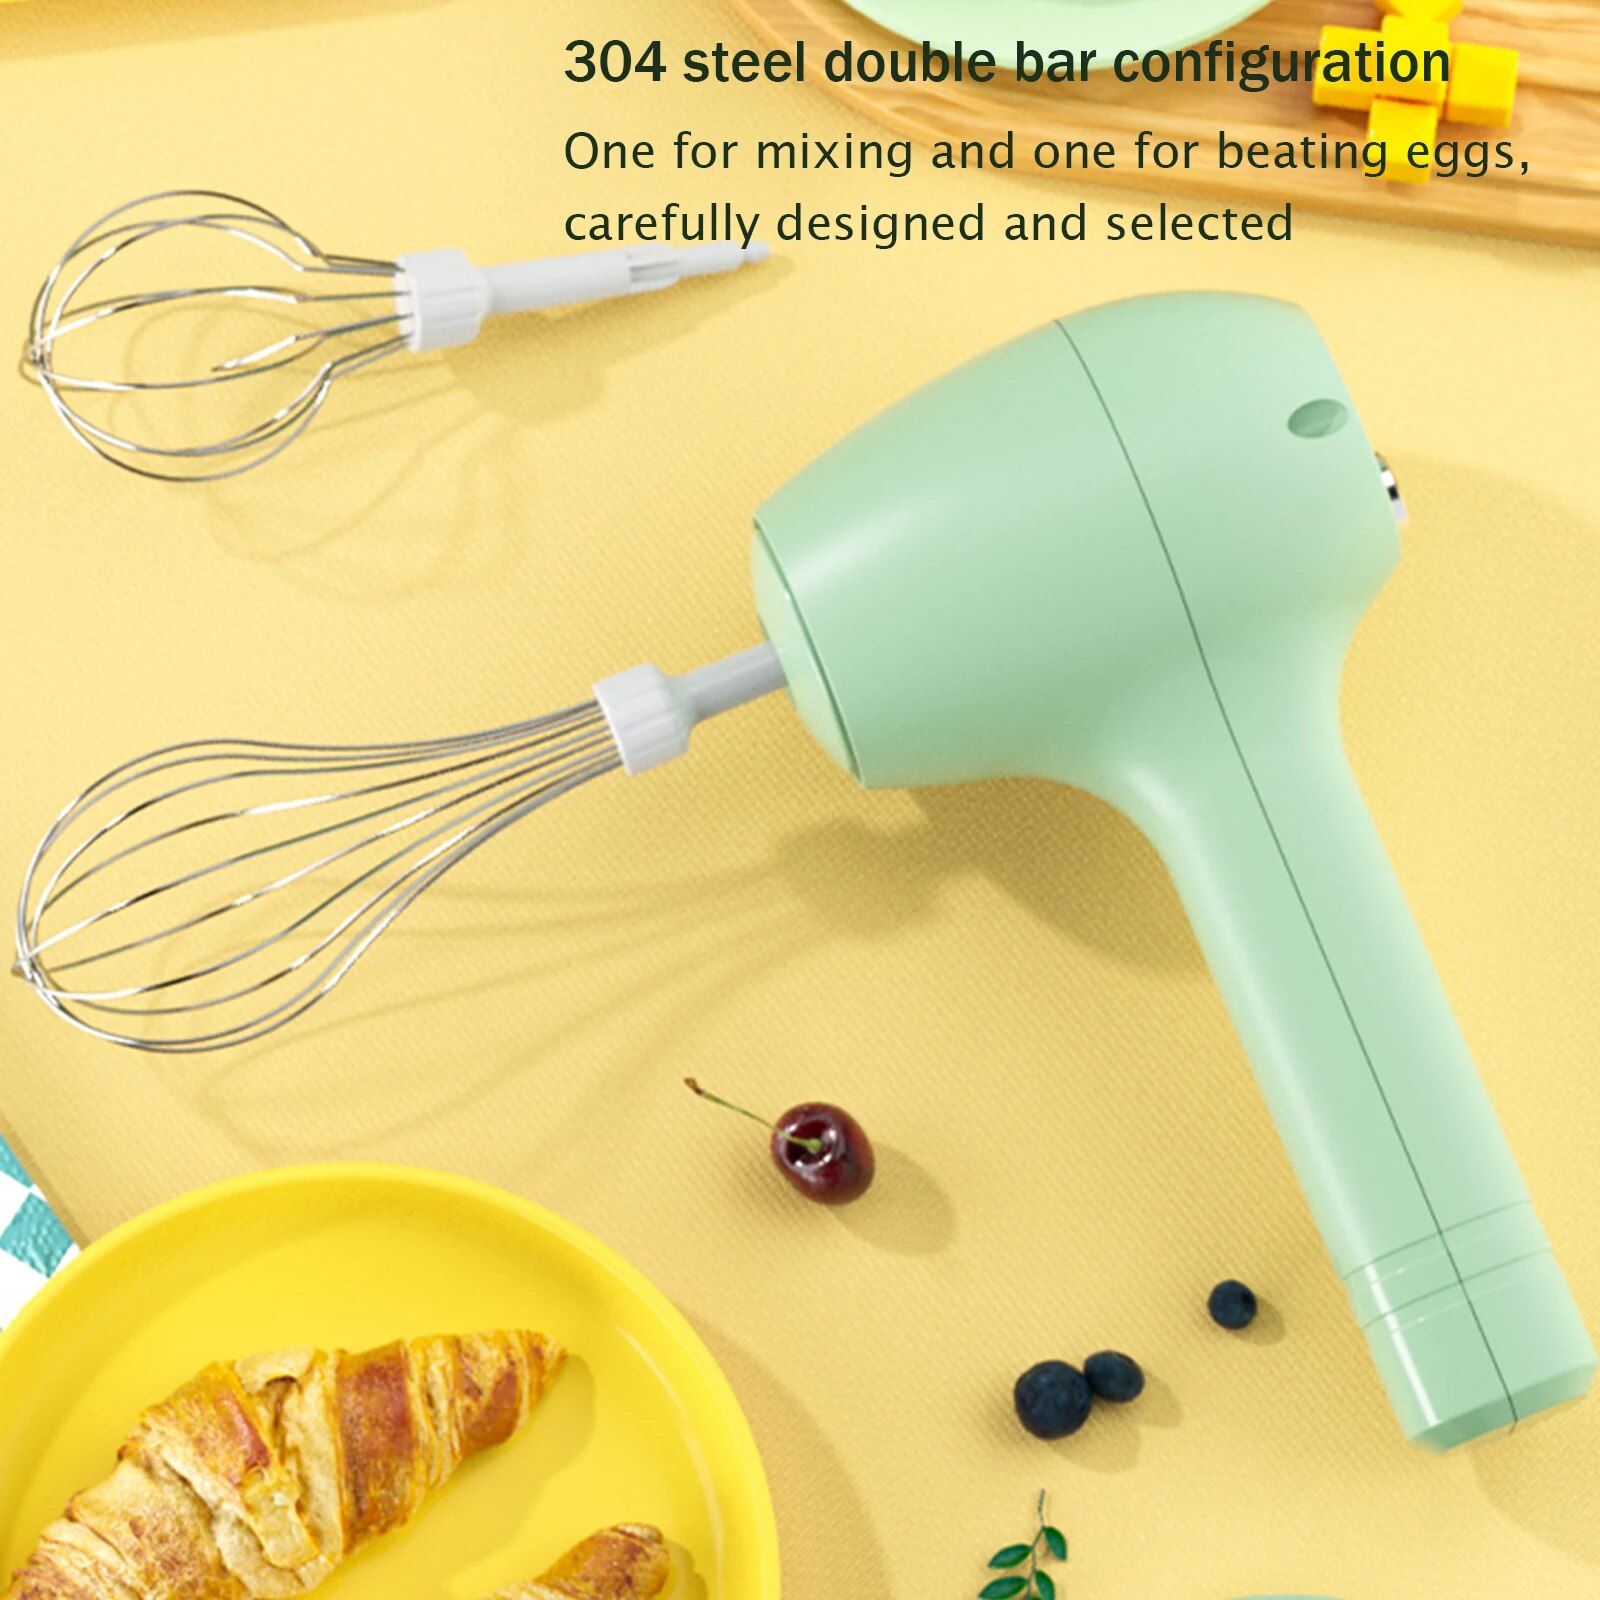 Portable Wireless Electric Mixer - USB Rechargeable Handheld Whisk & Food Blender 